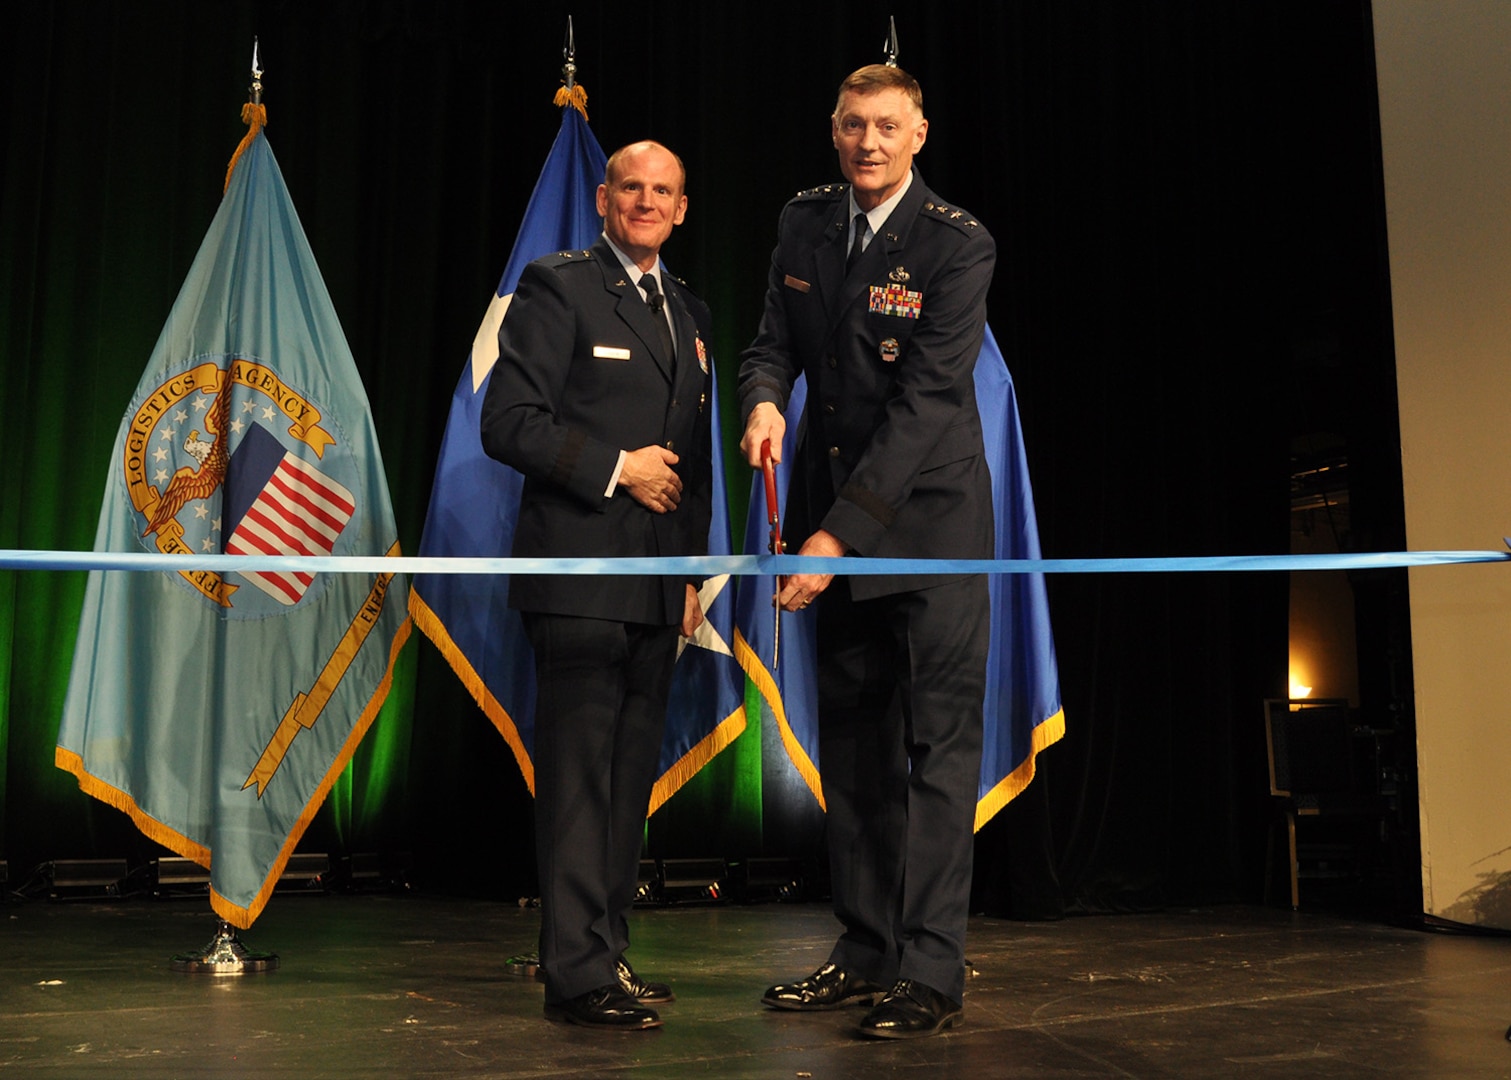 DLA Director Air Force Lt. Gen. Andy Busch joined DLA Energy Commander Air Force Brig. Gen. Martin Chapin for the Worldwide Energy Conference trade show ribbon-cutting ceremony at the Gaylord National Hotel & Convention Center Apr. 10.